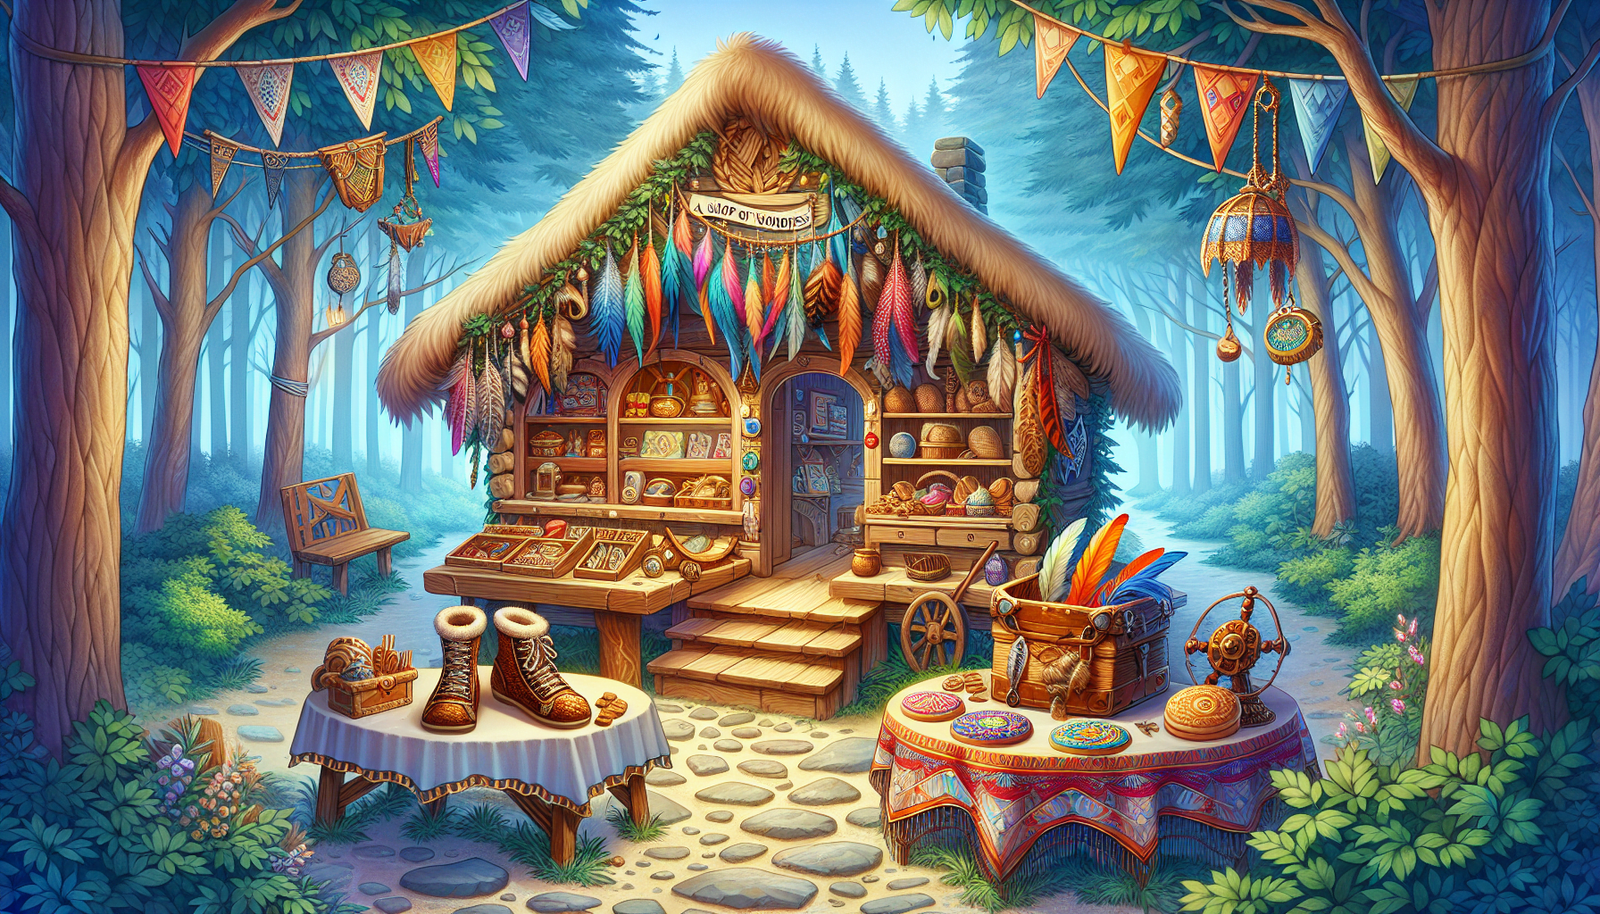 A whimsical shop filled with enchanting items in a mystical woodland.